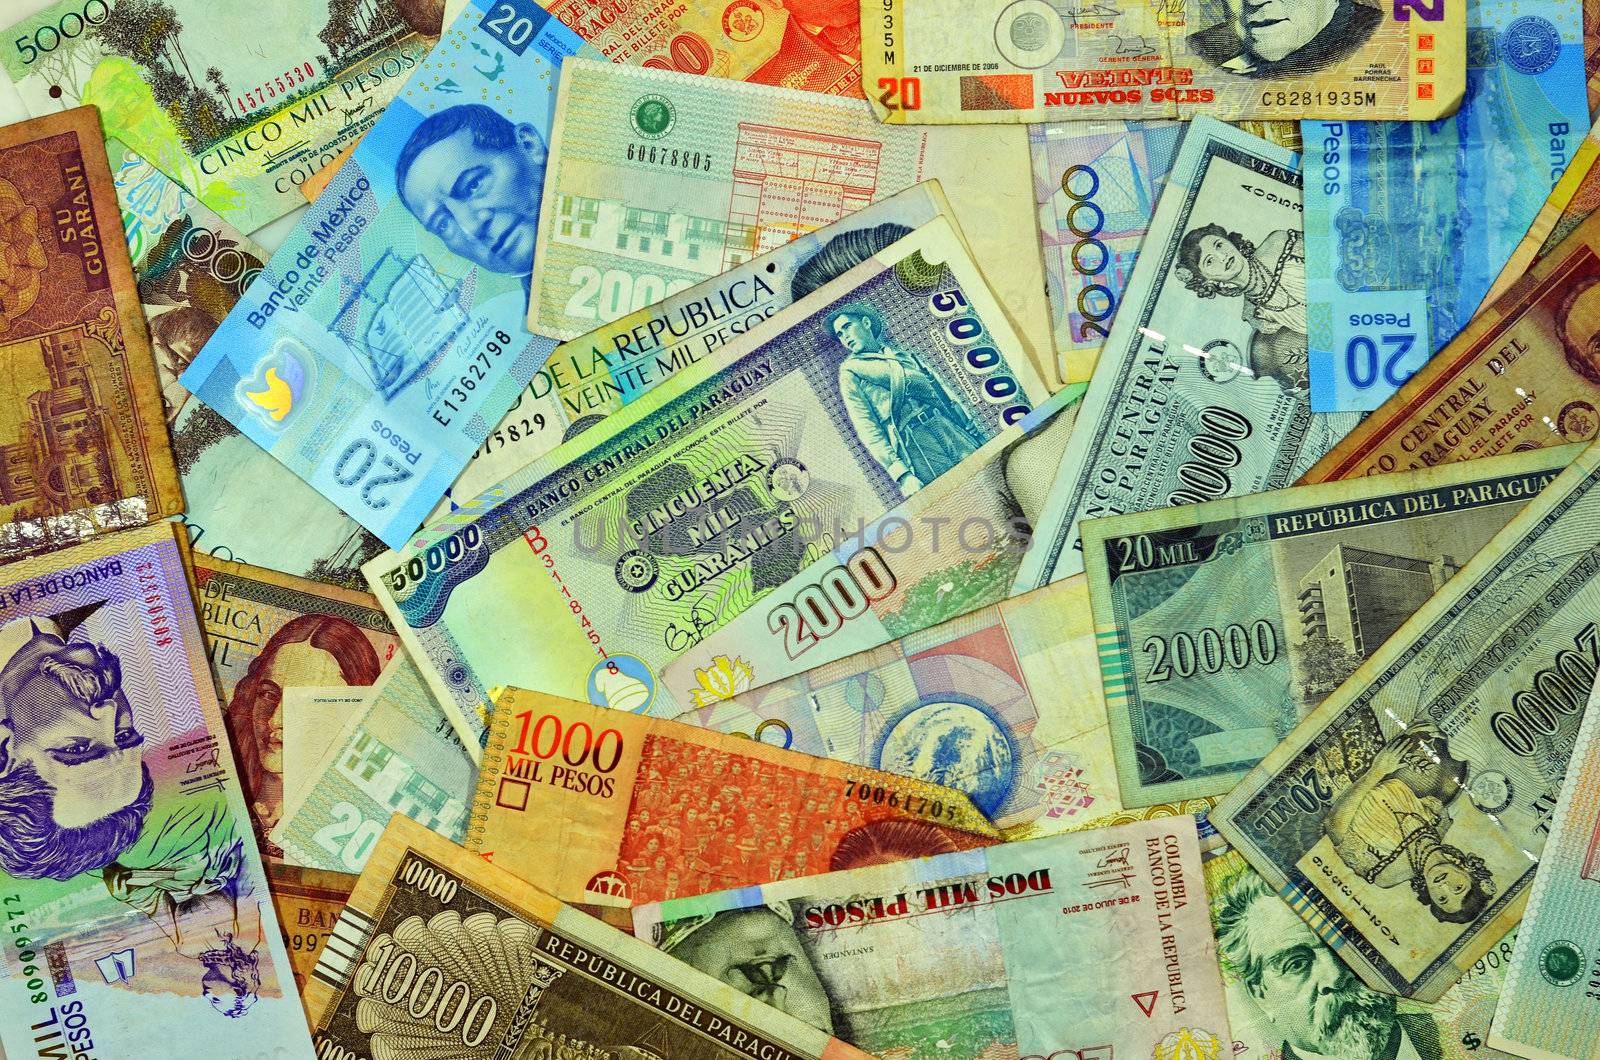 Currency from Latin American countries such as Argentina, Uruguay, Paraguay, Mexico, Colombia, and Peru